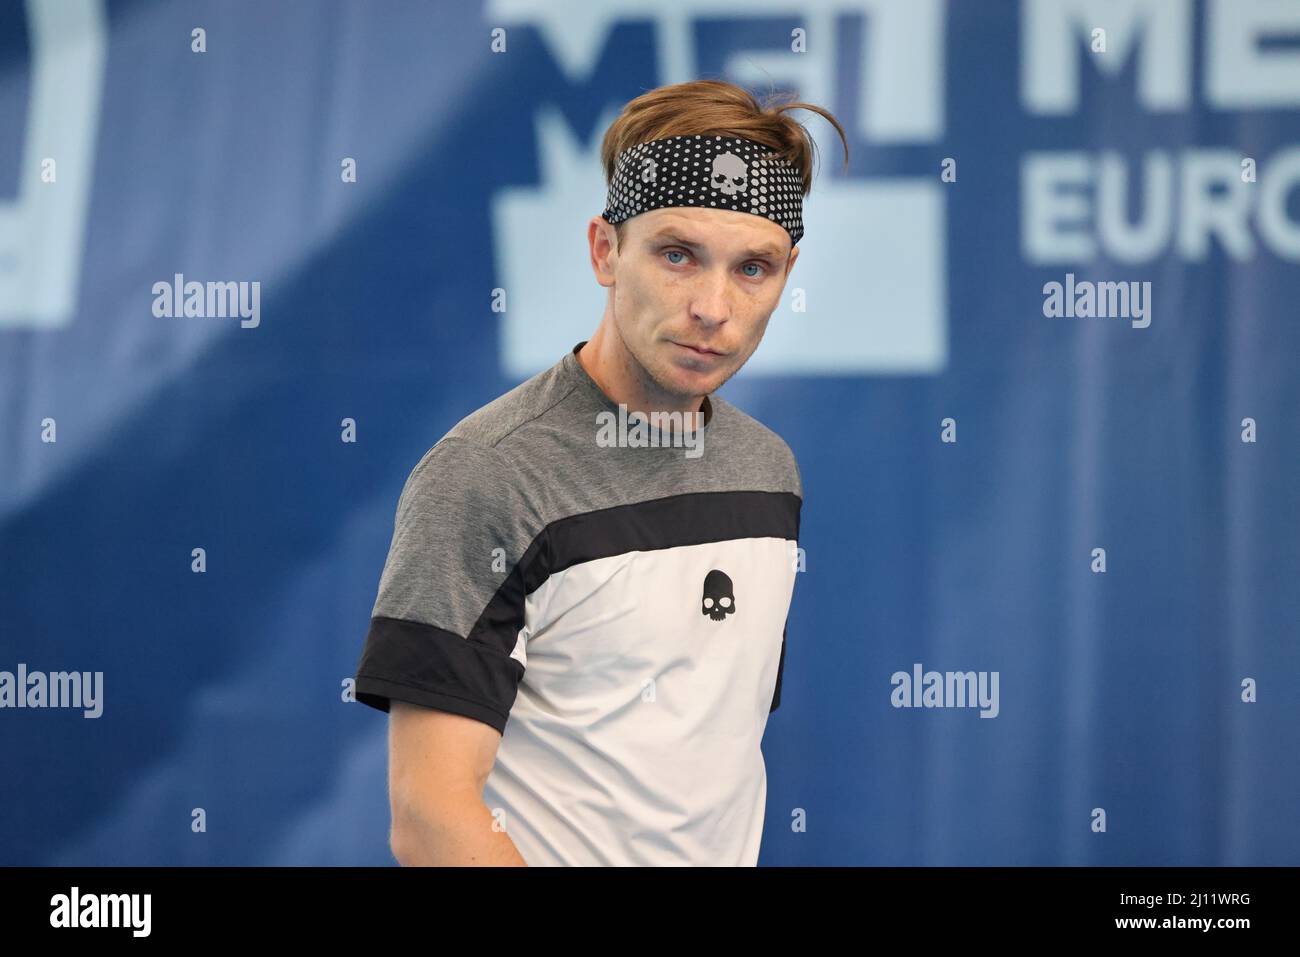 Alexey Vatutin during the Play In Challenger 2022, ATP Challenger Tour  tennis tournament on March 21,